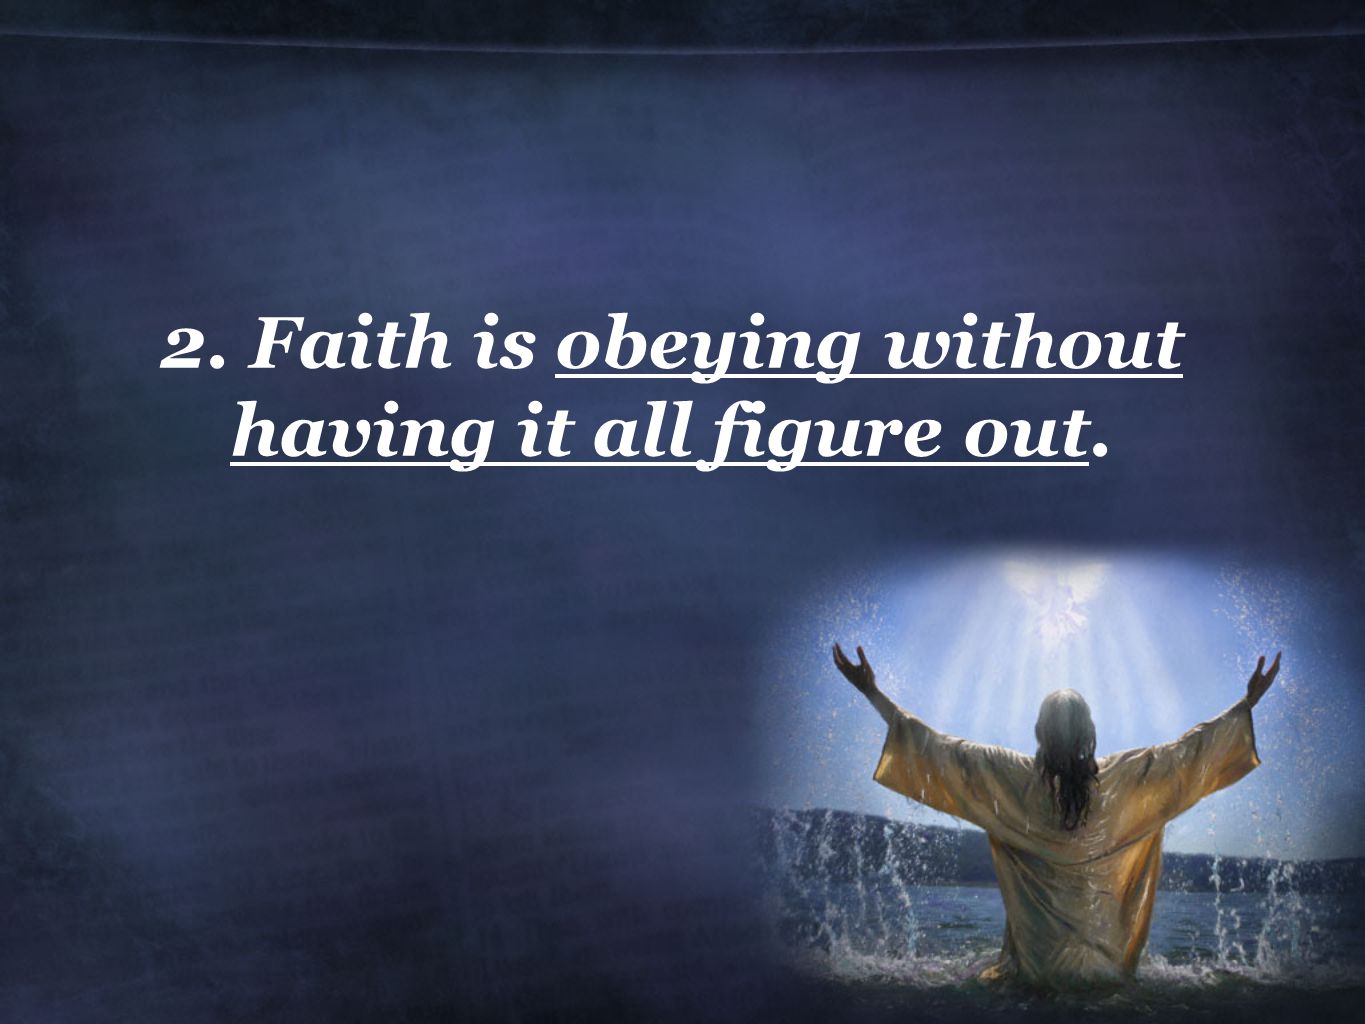 2. Faith is obeying without having it all figure out.